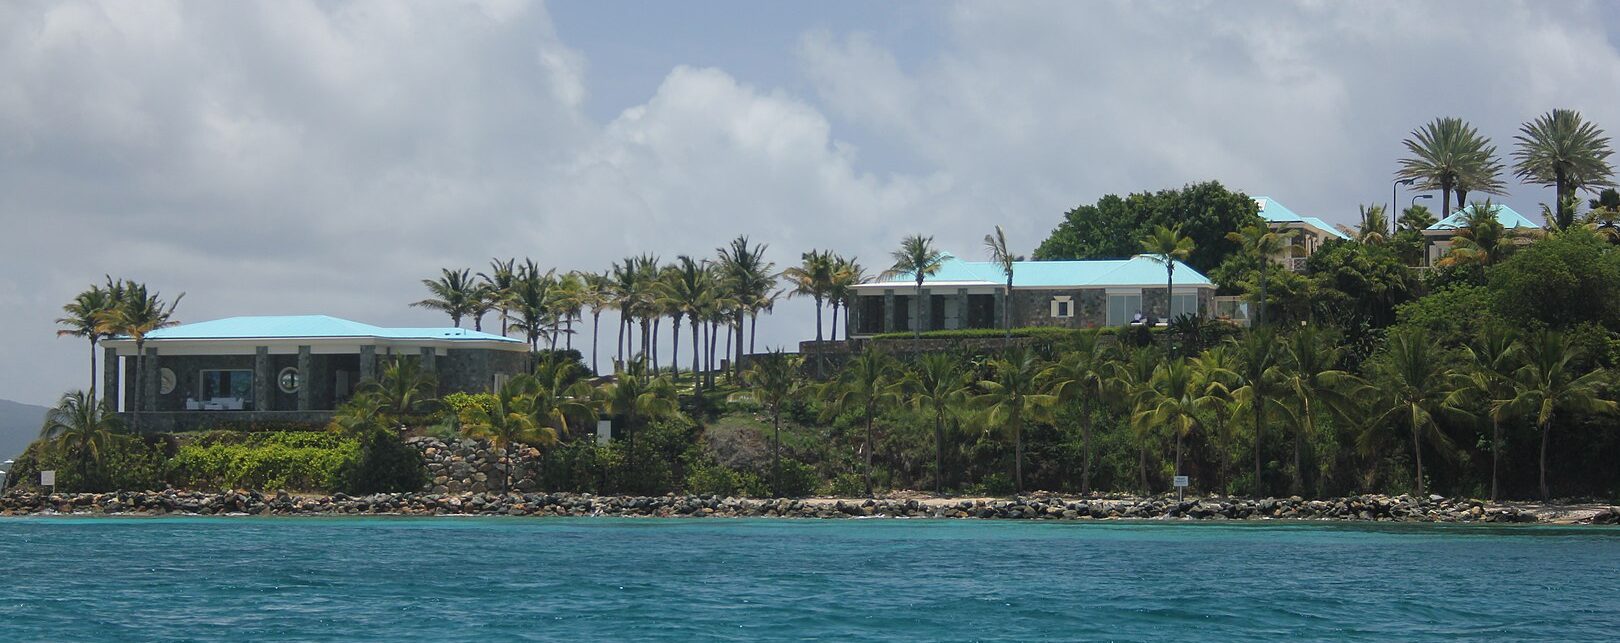 Jeffrey Epstein's primary residence, his private estate on Little St. James in the U.S. Virgin Islands. (Shutterstock photo)